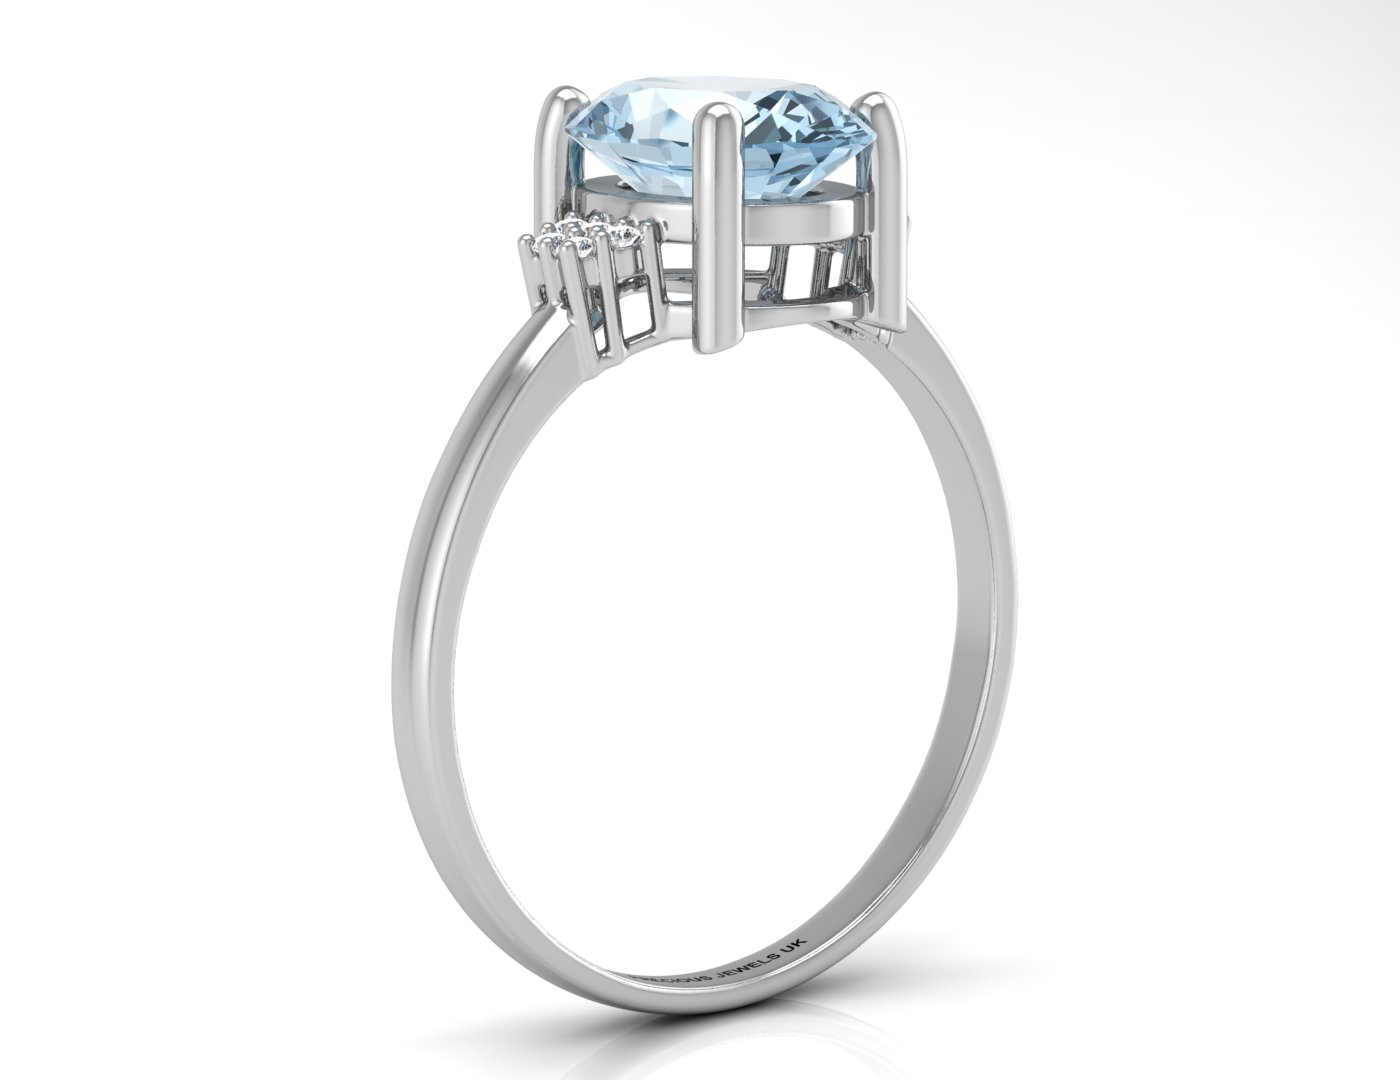 9ct White Gold Diamond And Blue Topaz Ring - Image 2 of 4